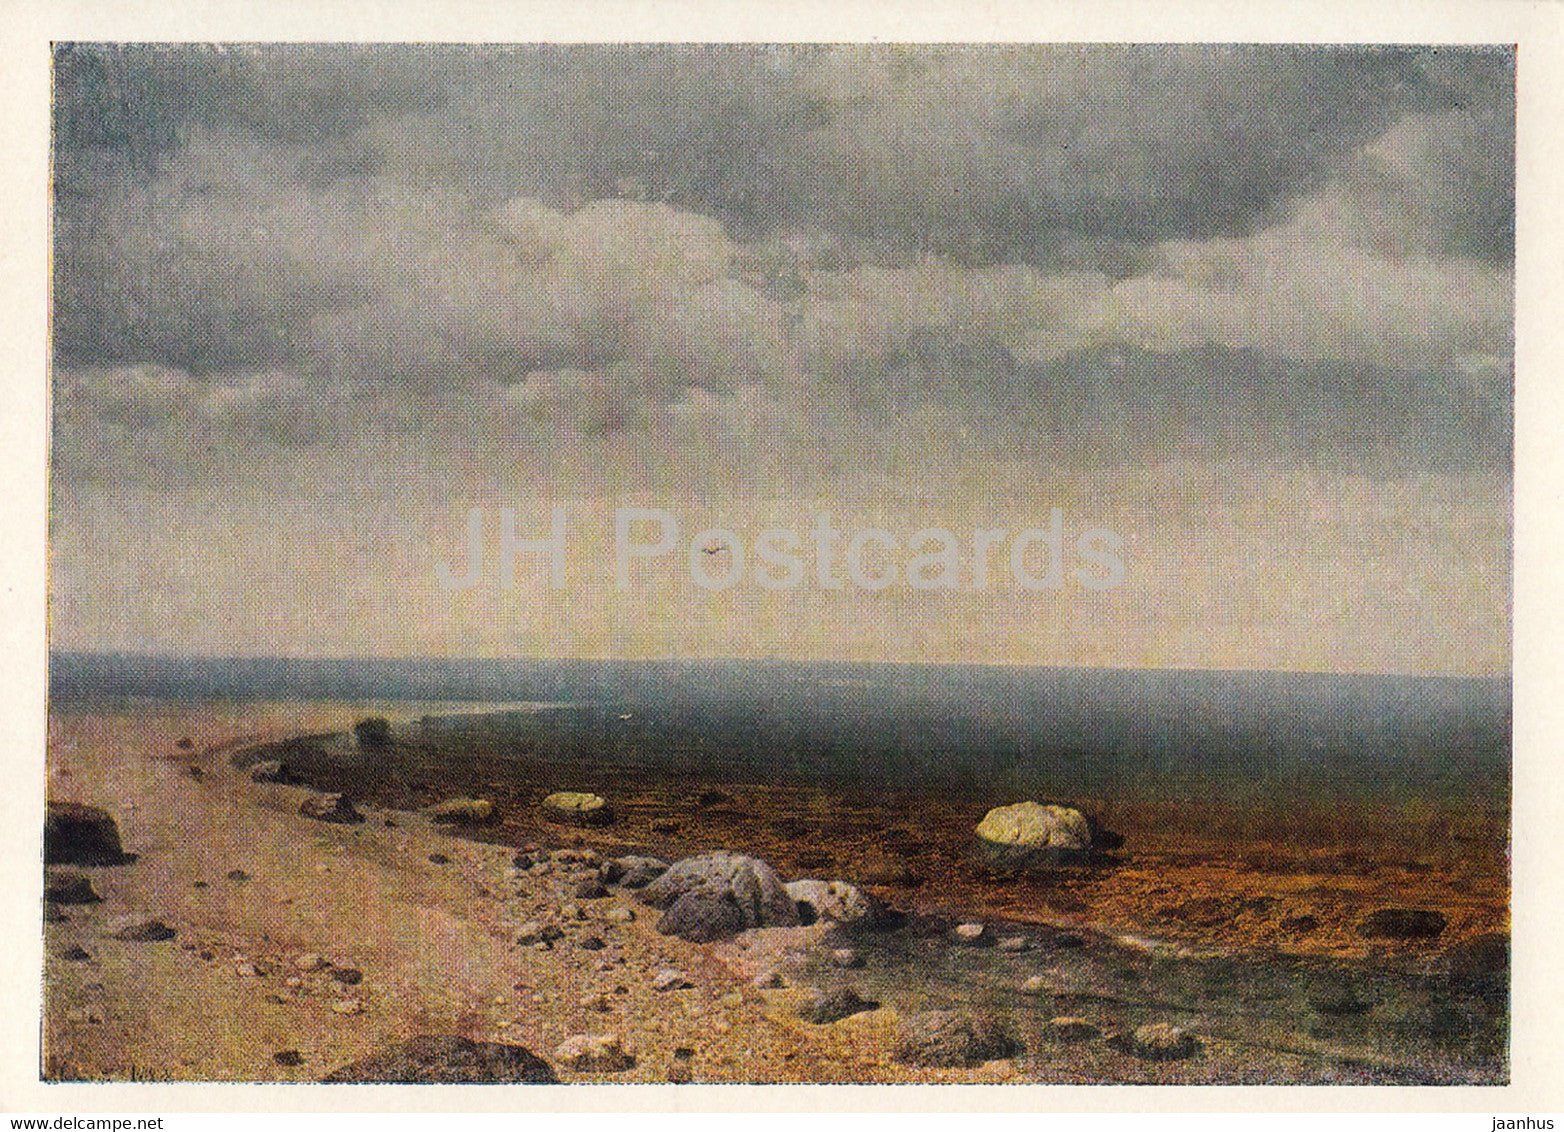 painting by R. Sudkovsky - Quiet at sea - Russian art - 1966 - Russia USSR - unused - JH Postcards